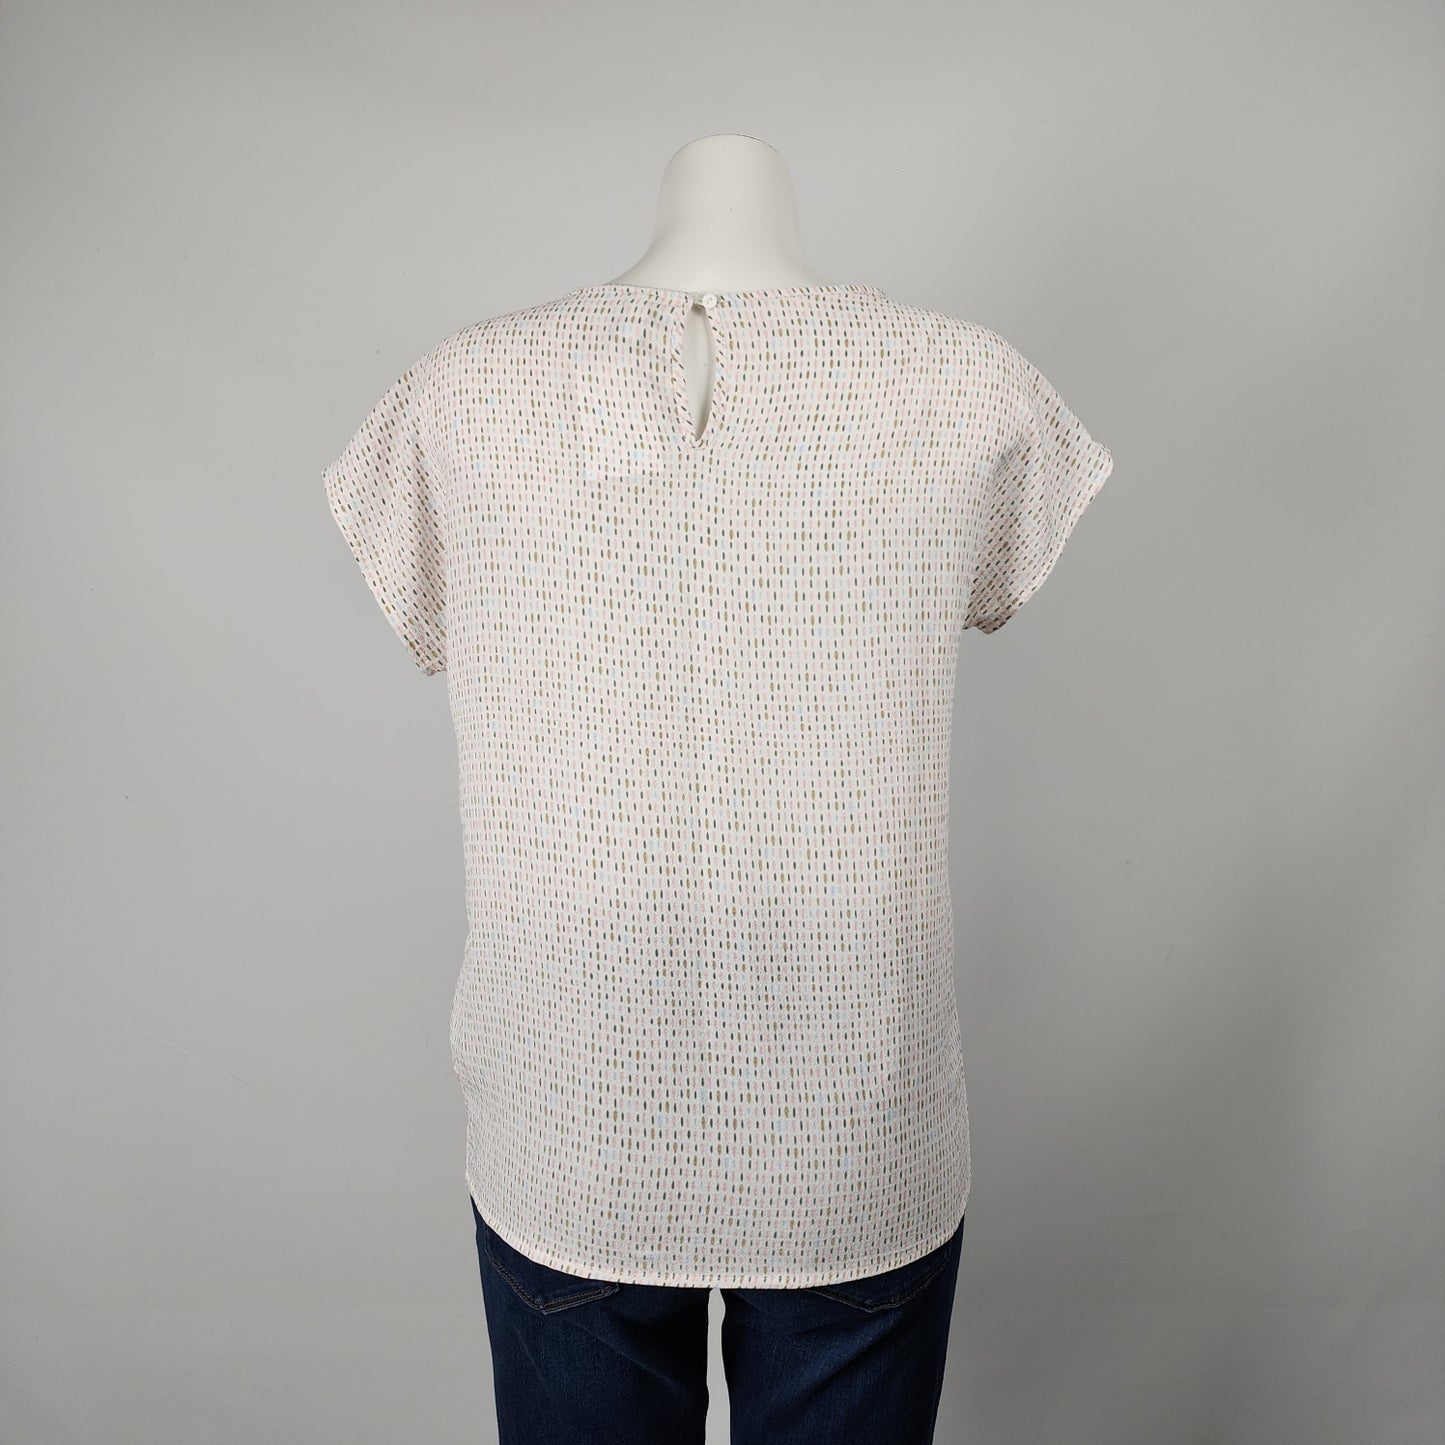 Soya Concept Pink Speckle Print Short Sleeve Top Size XS/S